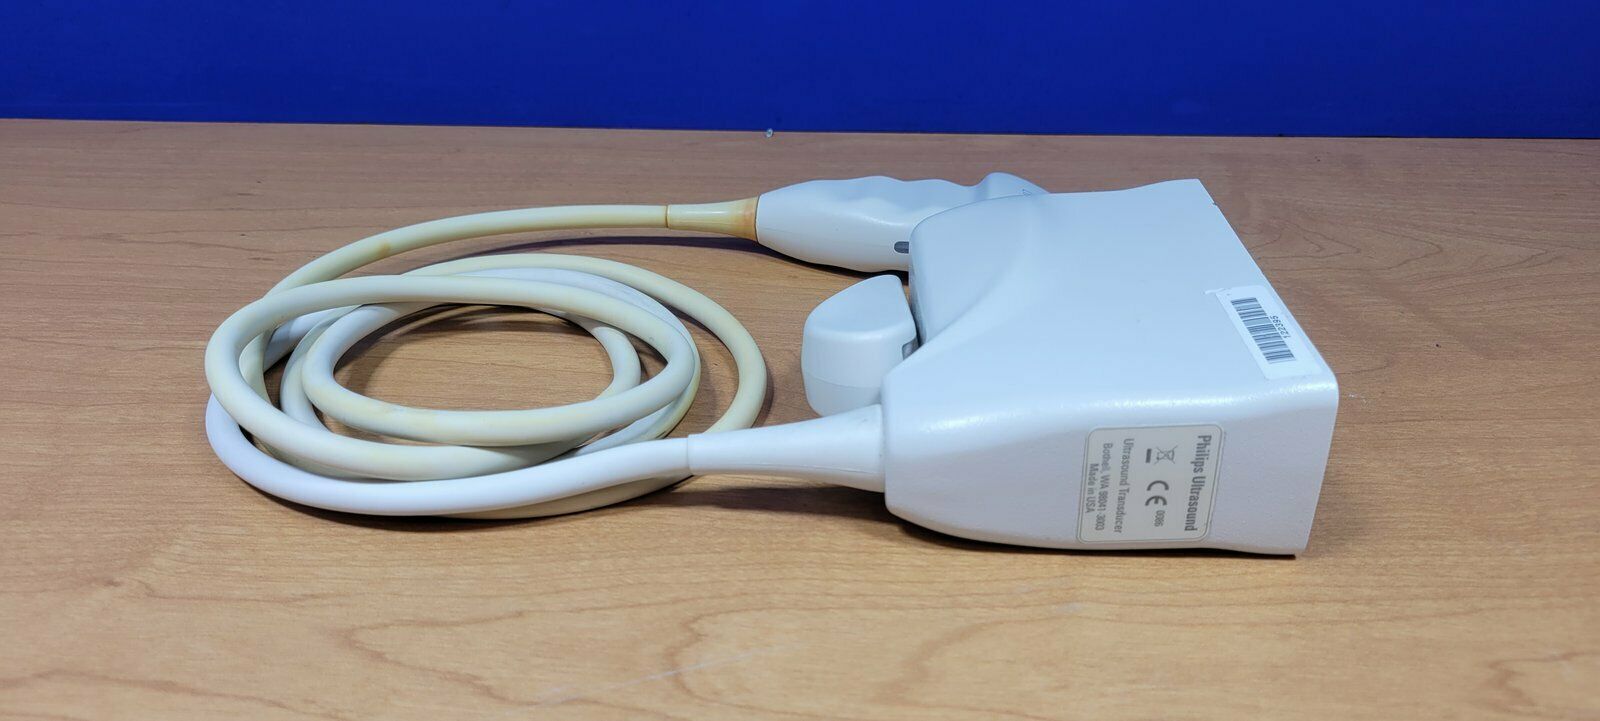 PHILIPS L17-5 LINEAR ARRAY ULTRASOUND TRANSDUCER PROBE DIAGNOSTIC ULTRASOUND MACHINES FOR SALE